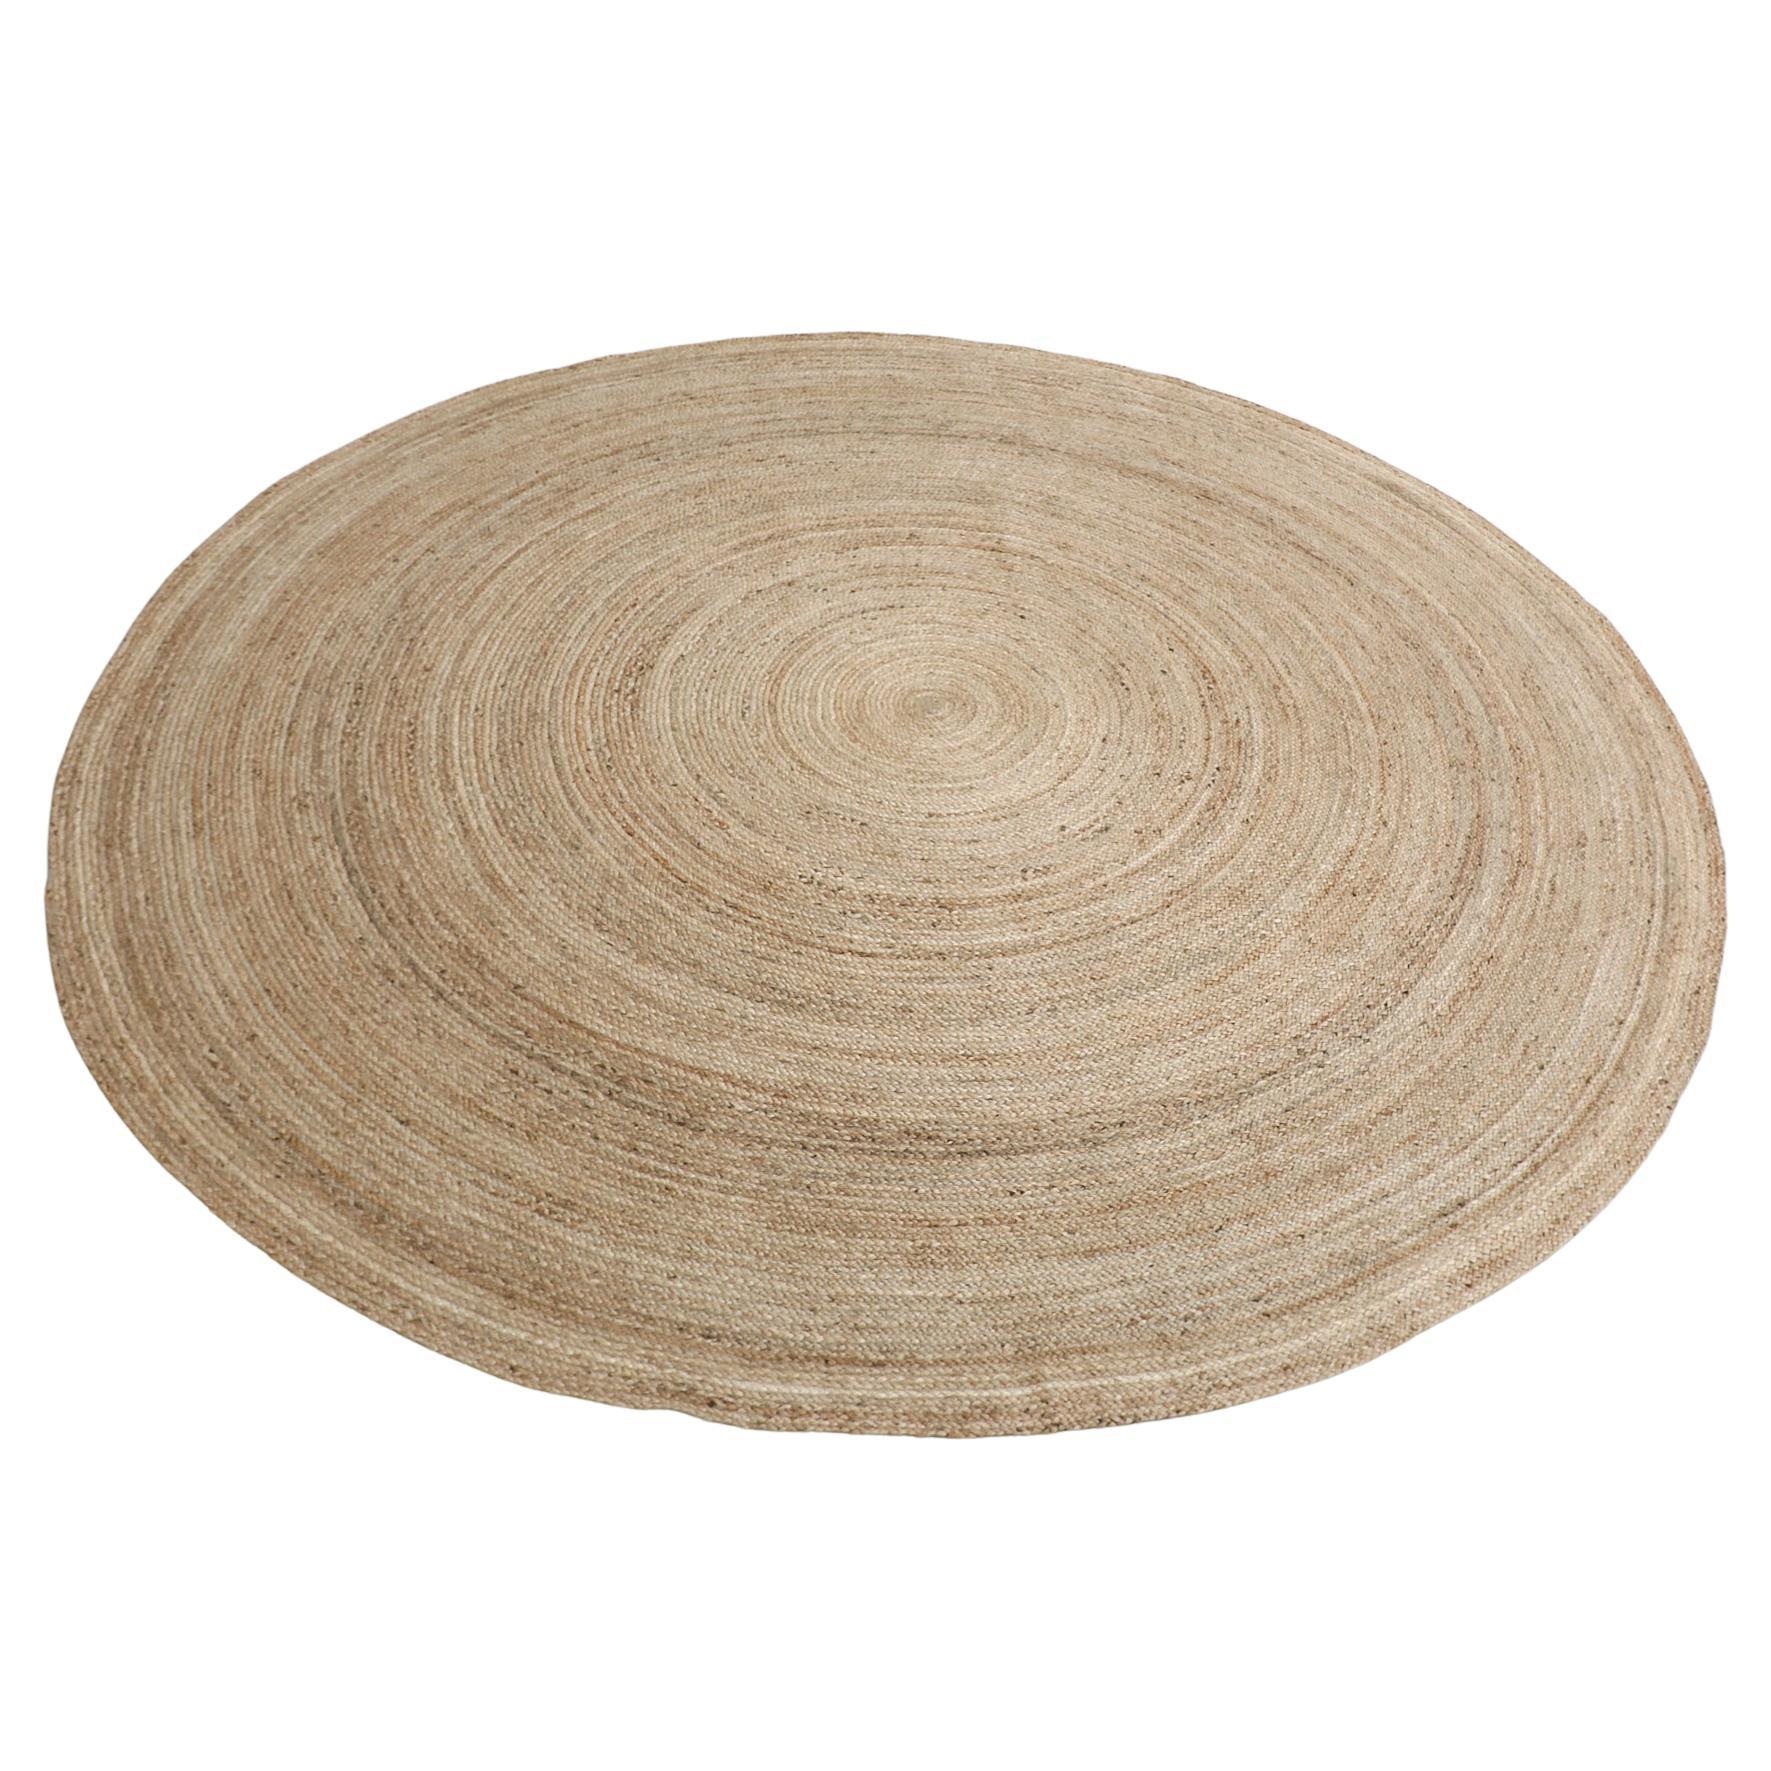 Hand braided 10ft Round Woven 'Montreal' Natural Sisal Rug, Made in India